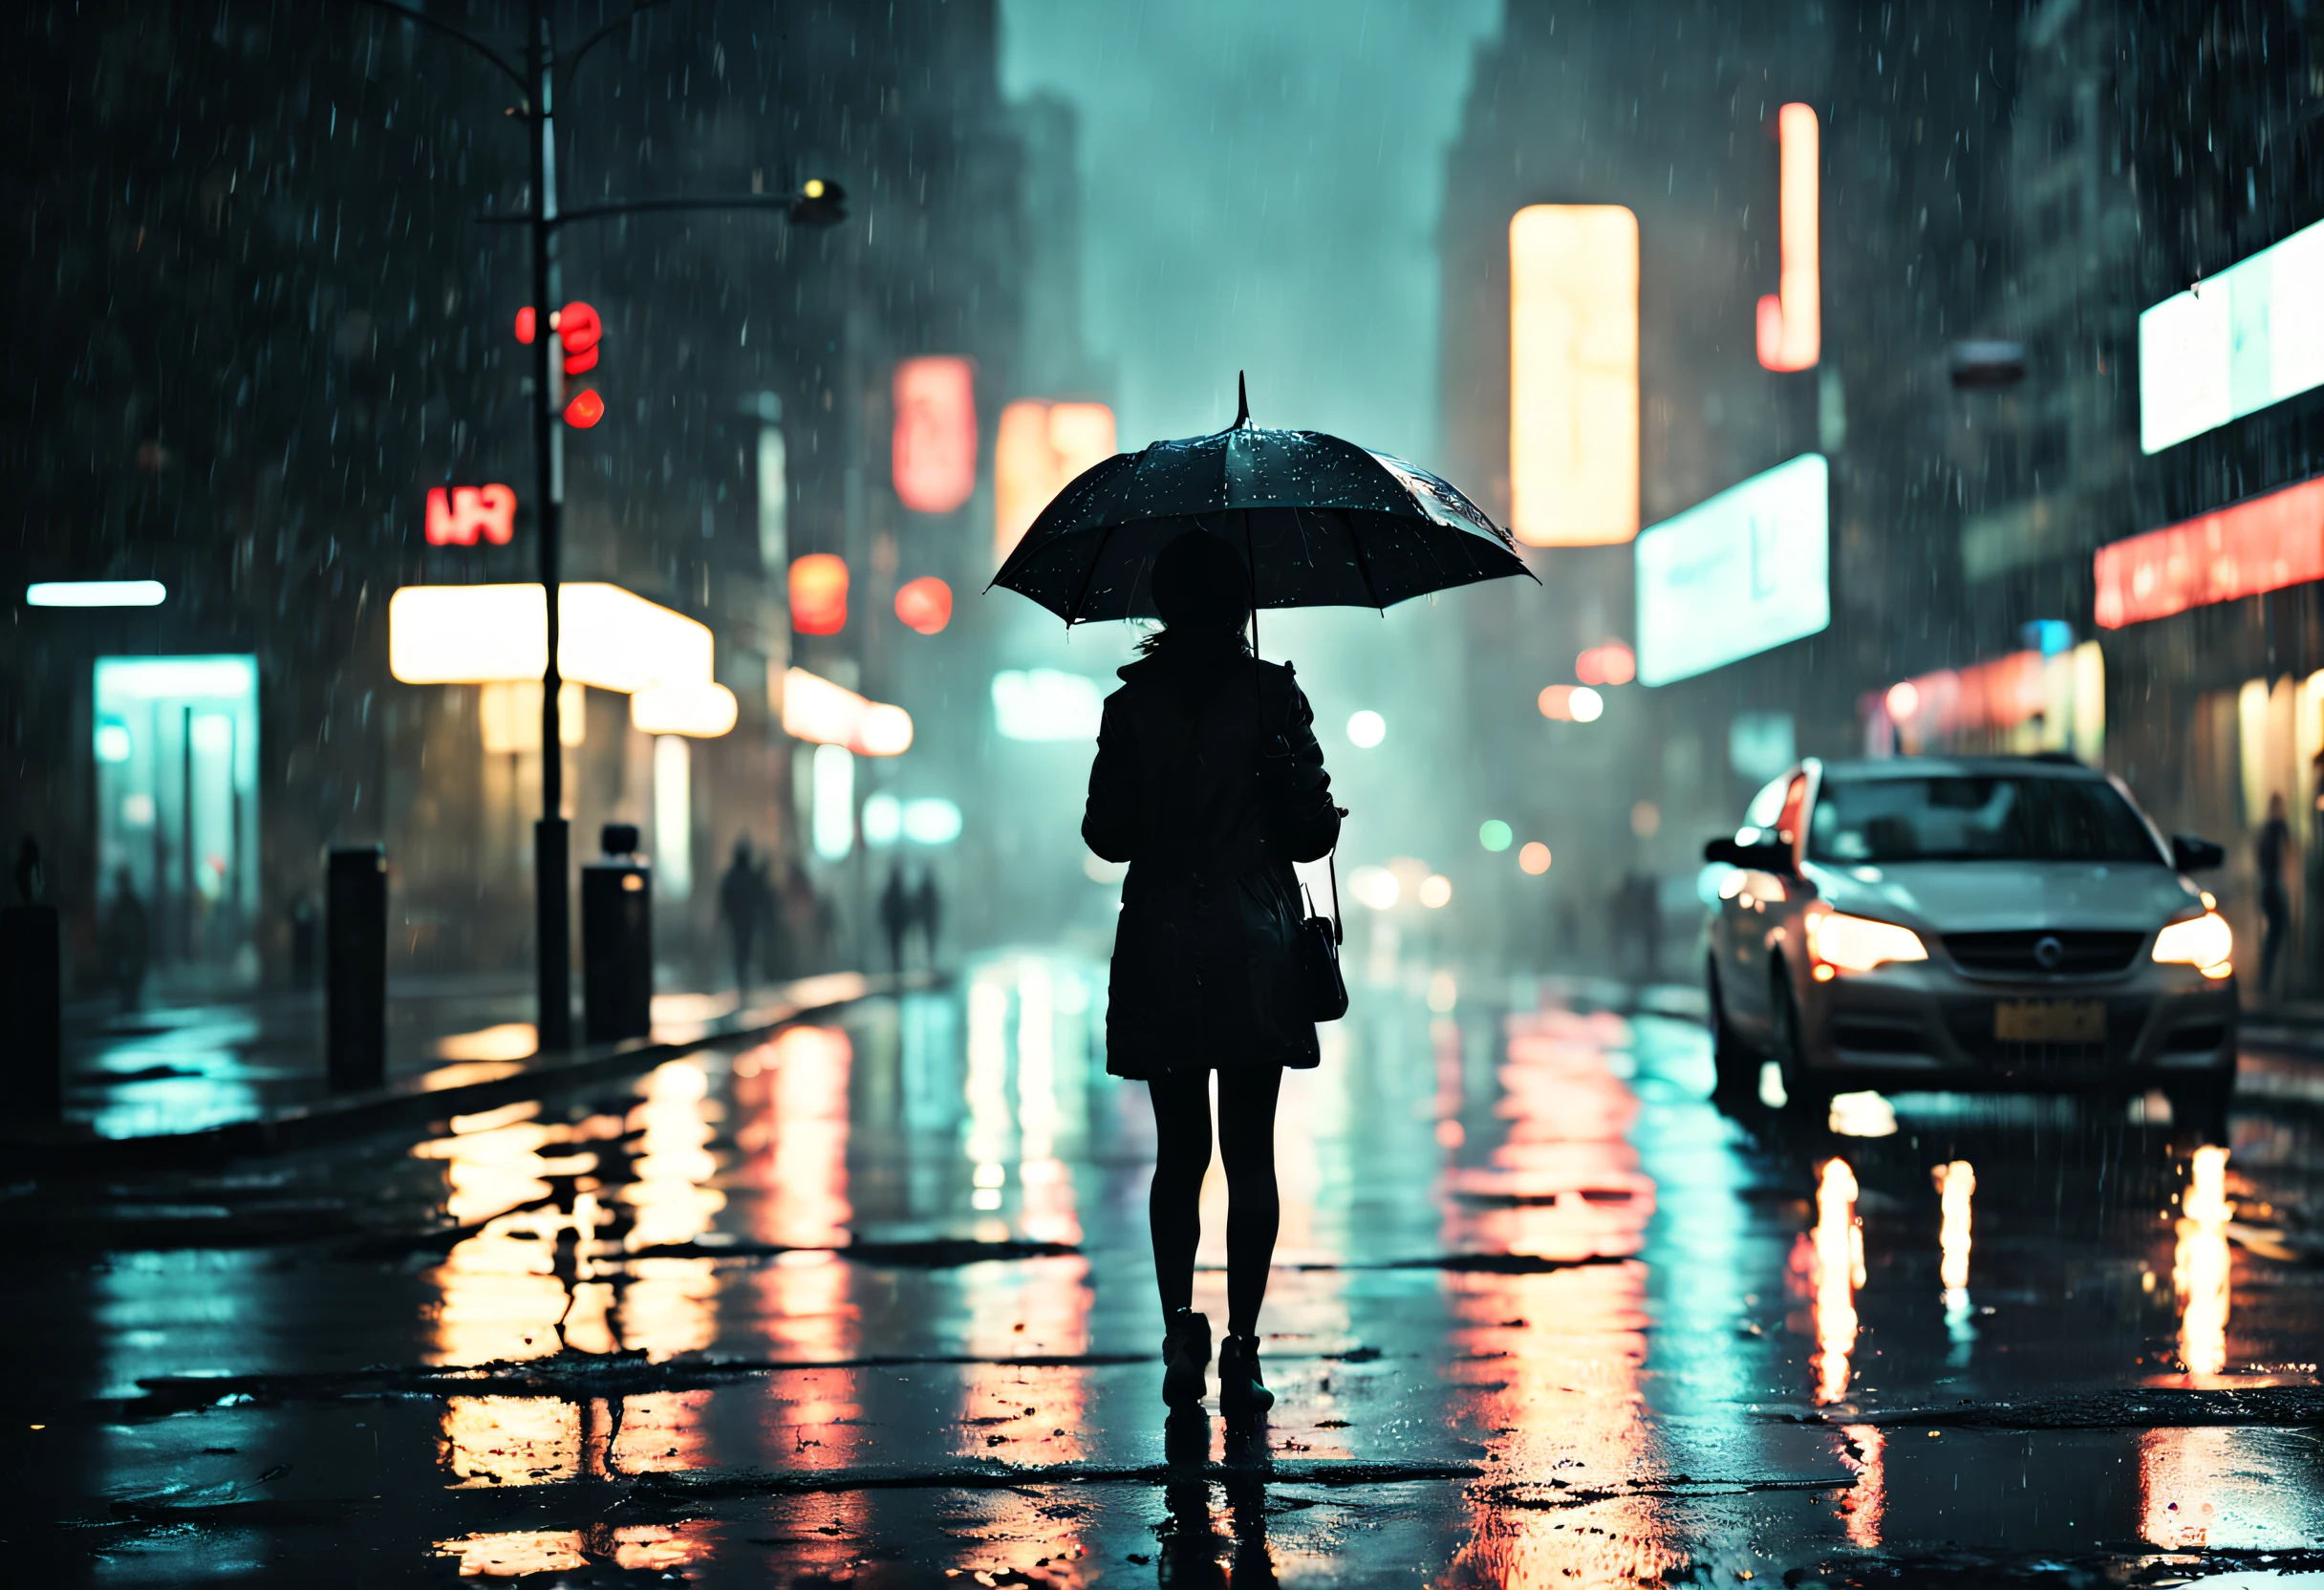 a girl standing under a dripping umbrella in a dimly lit street,raindrops glistening on the wet pavement,warm glow emanating from the street lights,reflections of neon signs in the puddles,people hurrying with umbrellas, the sound of raindrops hitting the umbrella, wet leaves scattered on the ground, misty atmosphere, the girl's silhouette highlighted by the street lights, rainy cityscape at night, cinematic and moody lighting, dramatic contrast between light and dark, a sense of mystery and solitude, wet and shiny textures, cool and desaturated color palette, impressionistic and dreamy art style. (best quality, 4k, ultra-detailed, realistic:1.37), rainy night, cityscape, cinematic lighting, wet textures, moody atmosphere, impressionistic art style